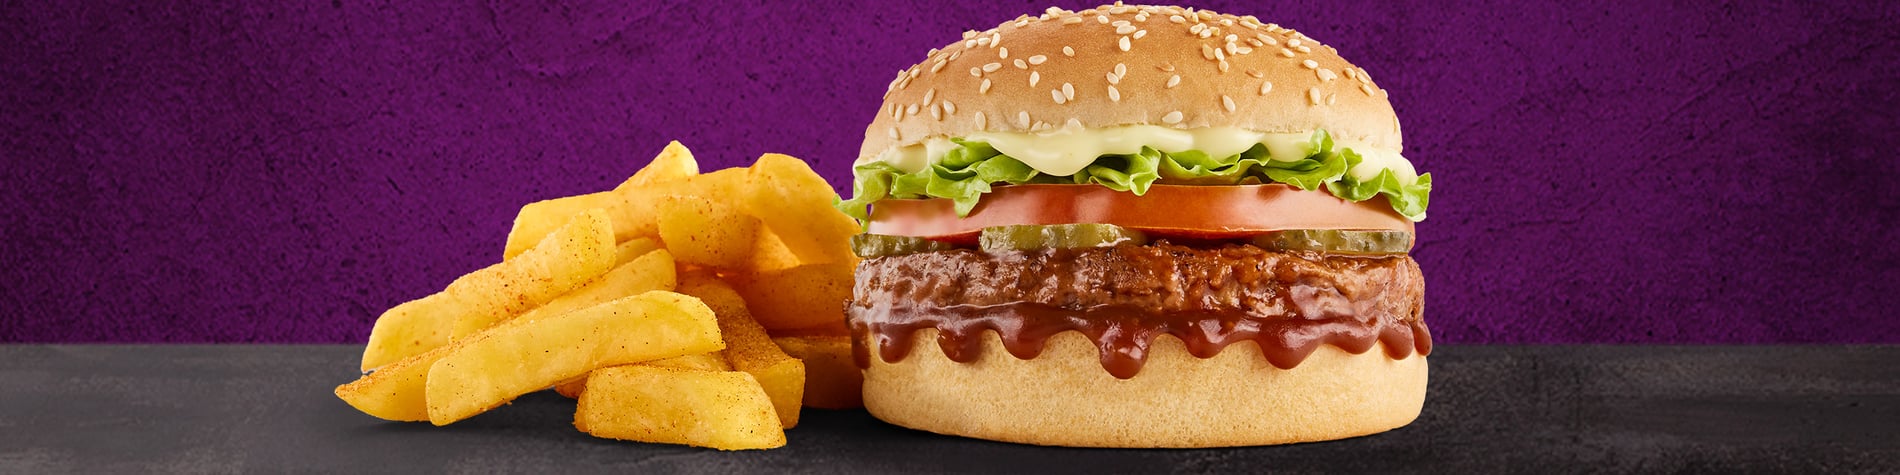 The NEW Mo’MjojoTM Burger Meal from Steers® Shell Aliwal North. 2 Flame-Grilled pure beef patties, pineapple, macon, tomato, lettuce, and small Famous Hand-Cut Chips, on a purple background.